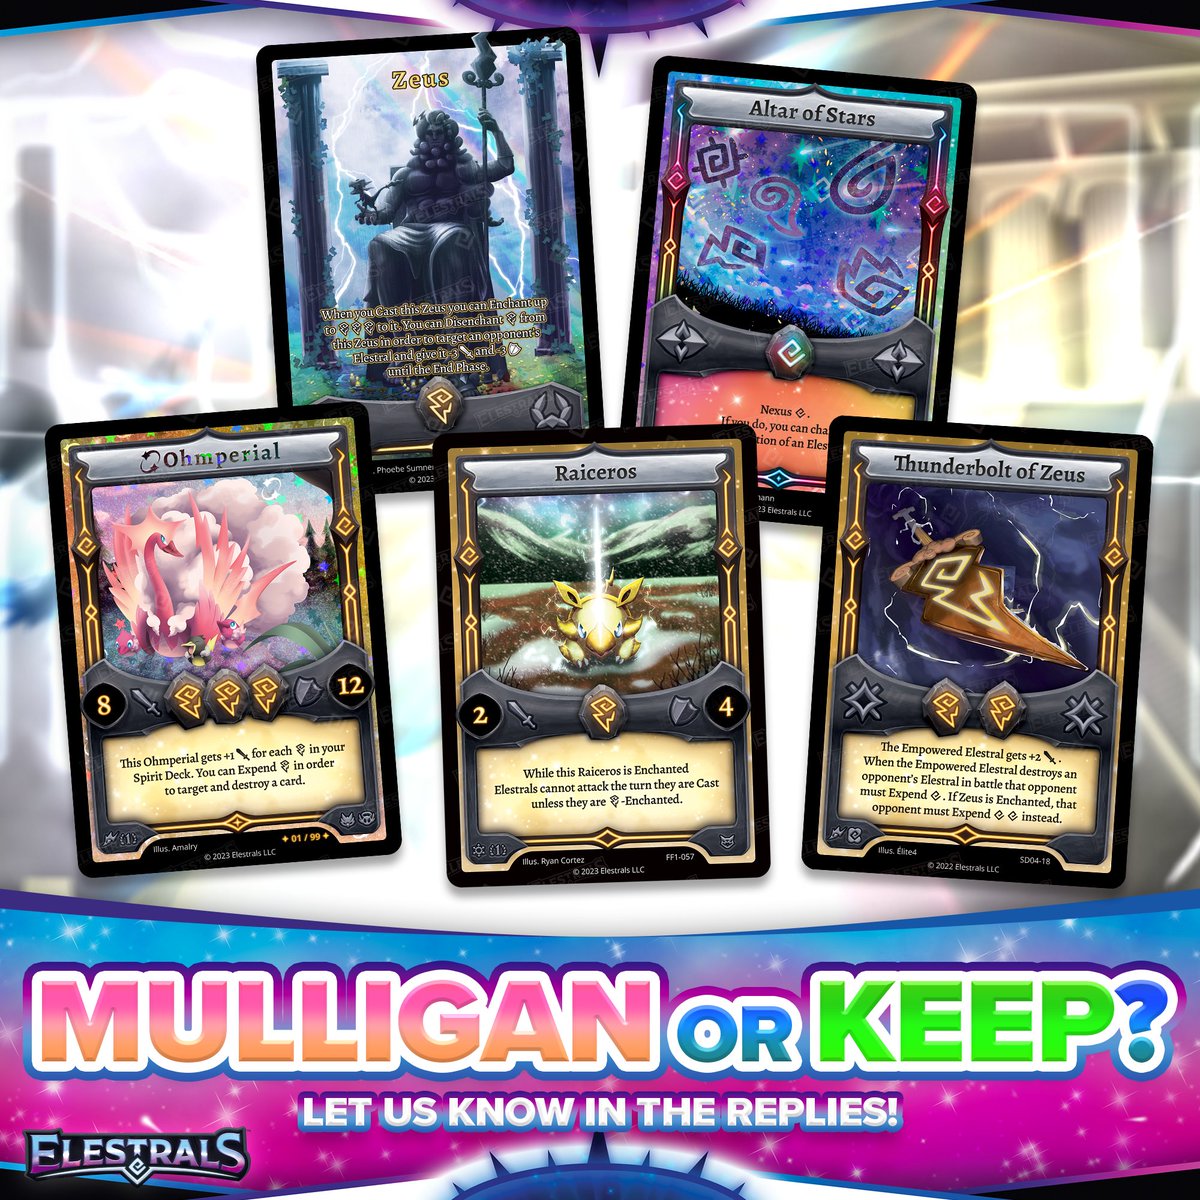 Thunder Casters, it’s time to play Keep or Mulligan! ⚡⚡⚡ If your starting hand is a Zeus, Altar of Stars, 💫Ohmperial, Raiceros, and a Thunderbolt of Zeus, are you keeping your hand or Expending 2 to try again? 🤔 Let us know what you’d do in the comments! #Elestrals #TCG…